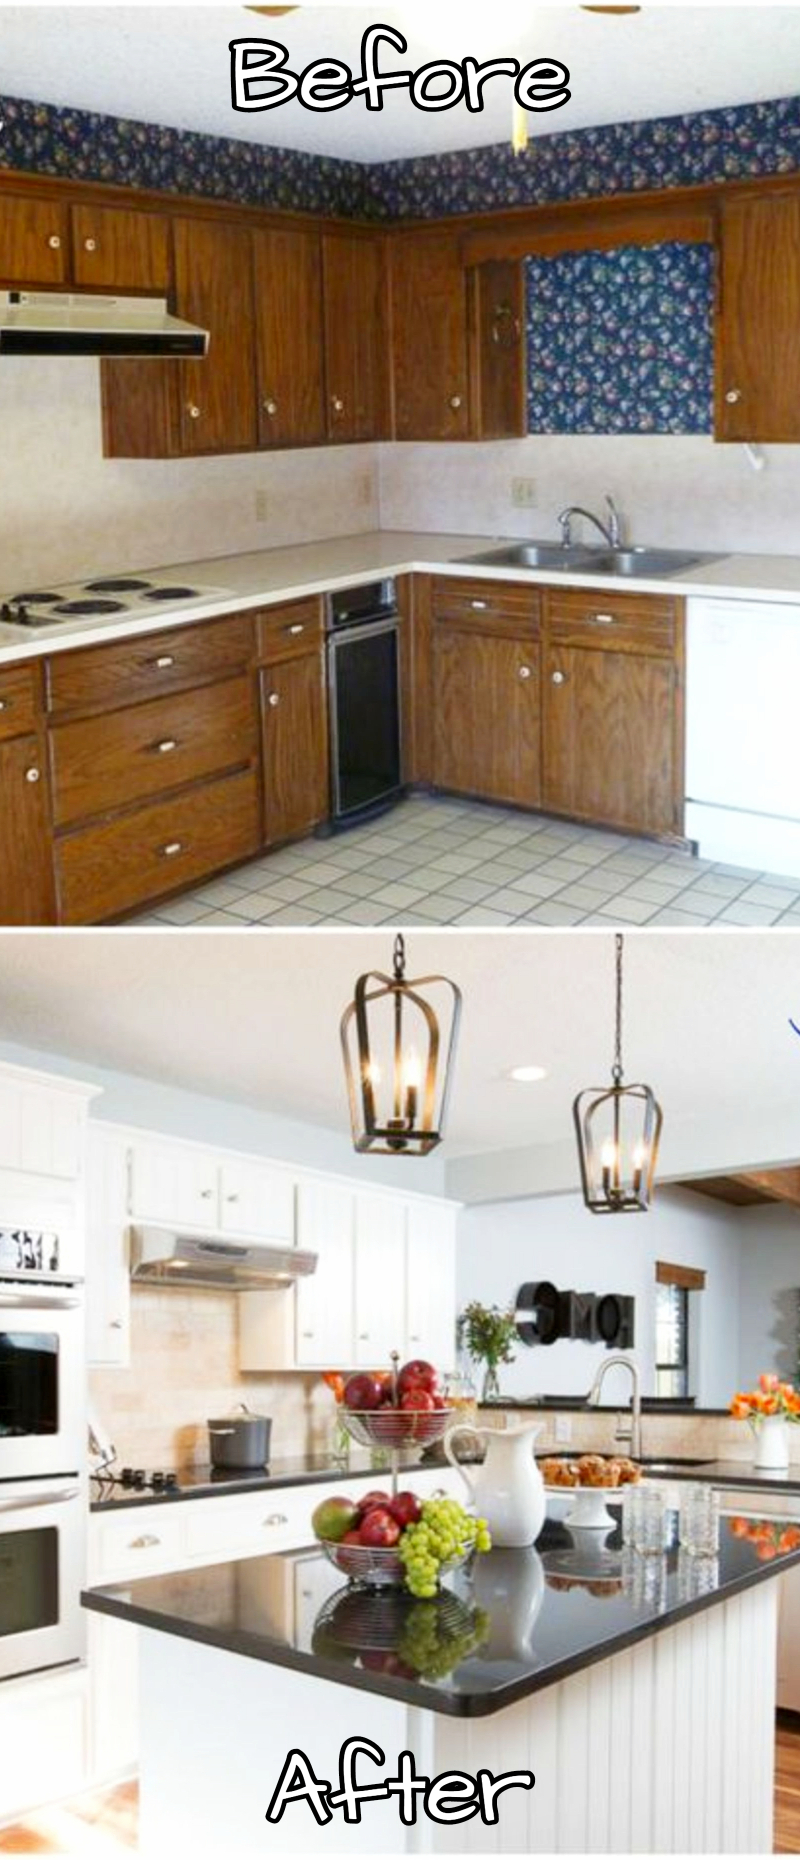 Small kitchen makeovers before and after - small kitchens remodel ideas and pictures #kitchenideas #farmhousedecor #kitchendecor #kitchenremodel #diyhomedecor #homedecorideas #farmhousekitchen